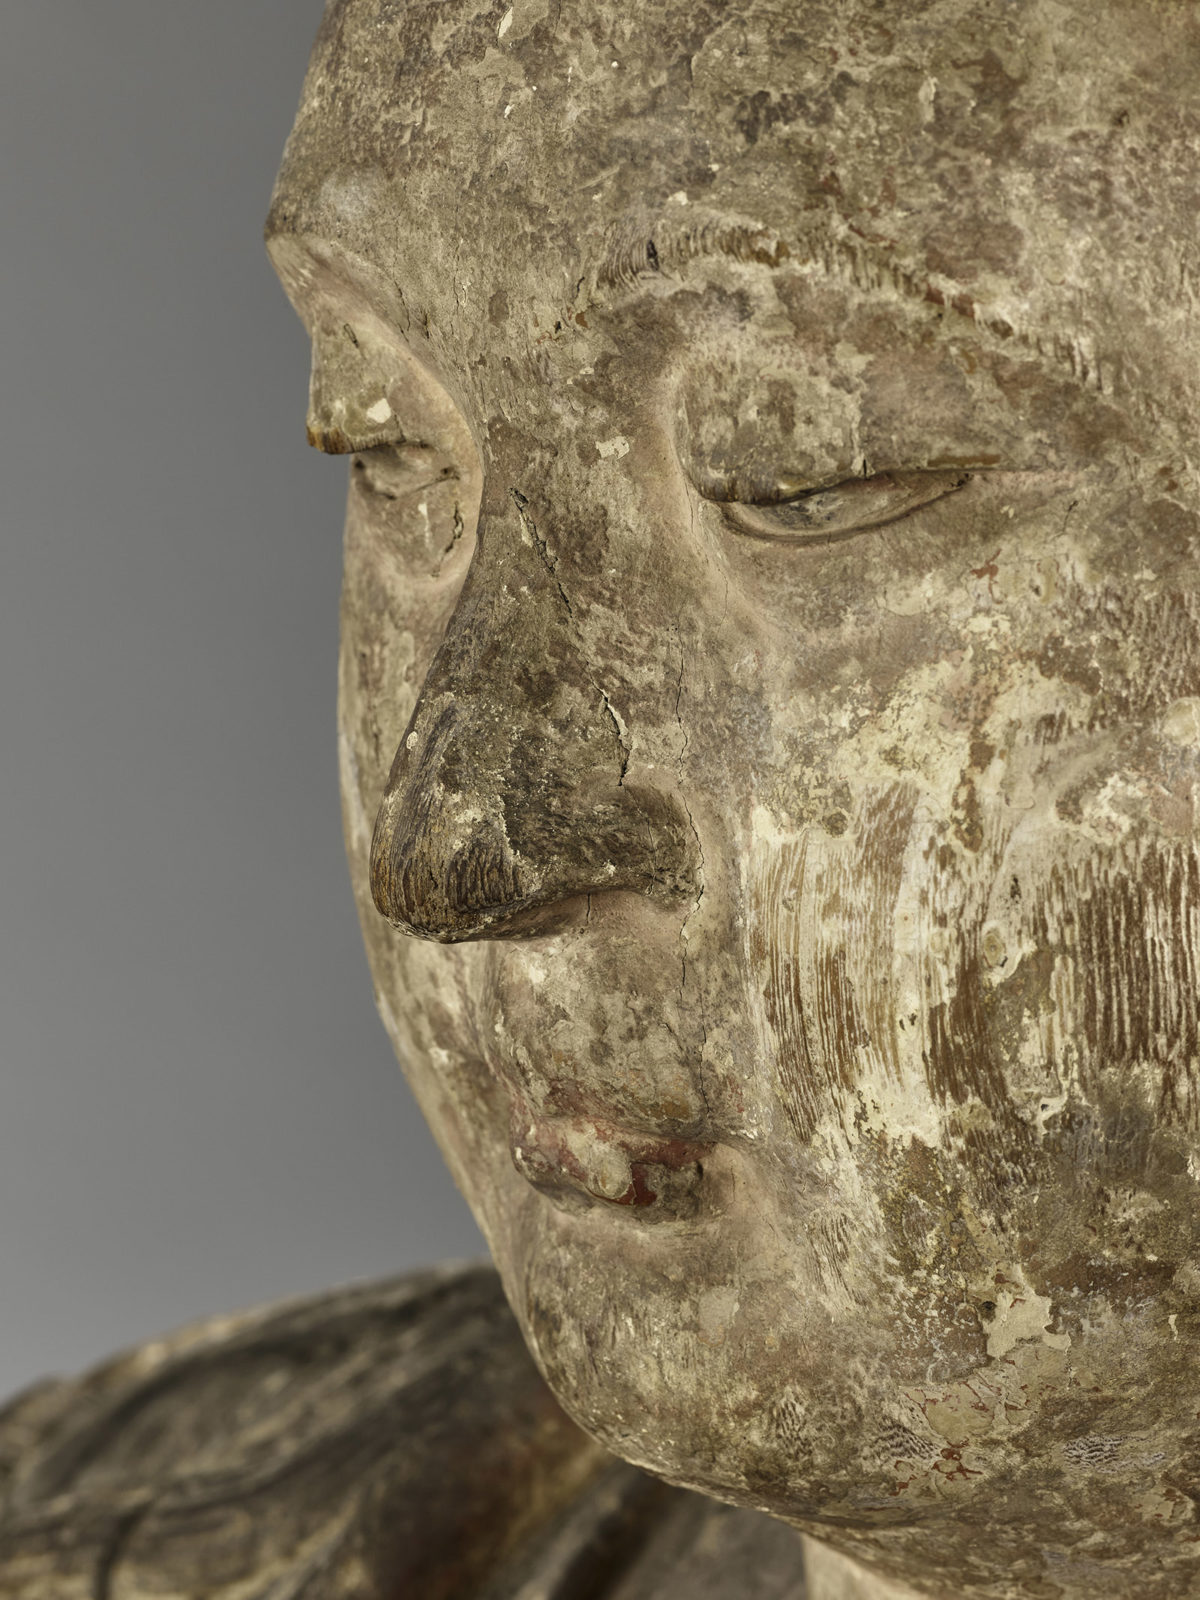 Close up of the face of a wooden statue of Guanyin.